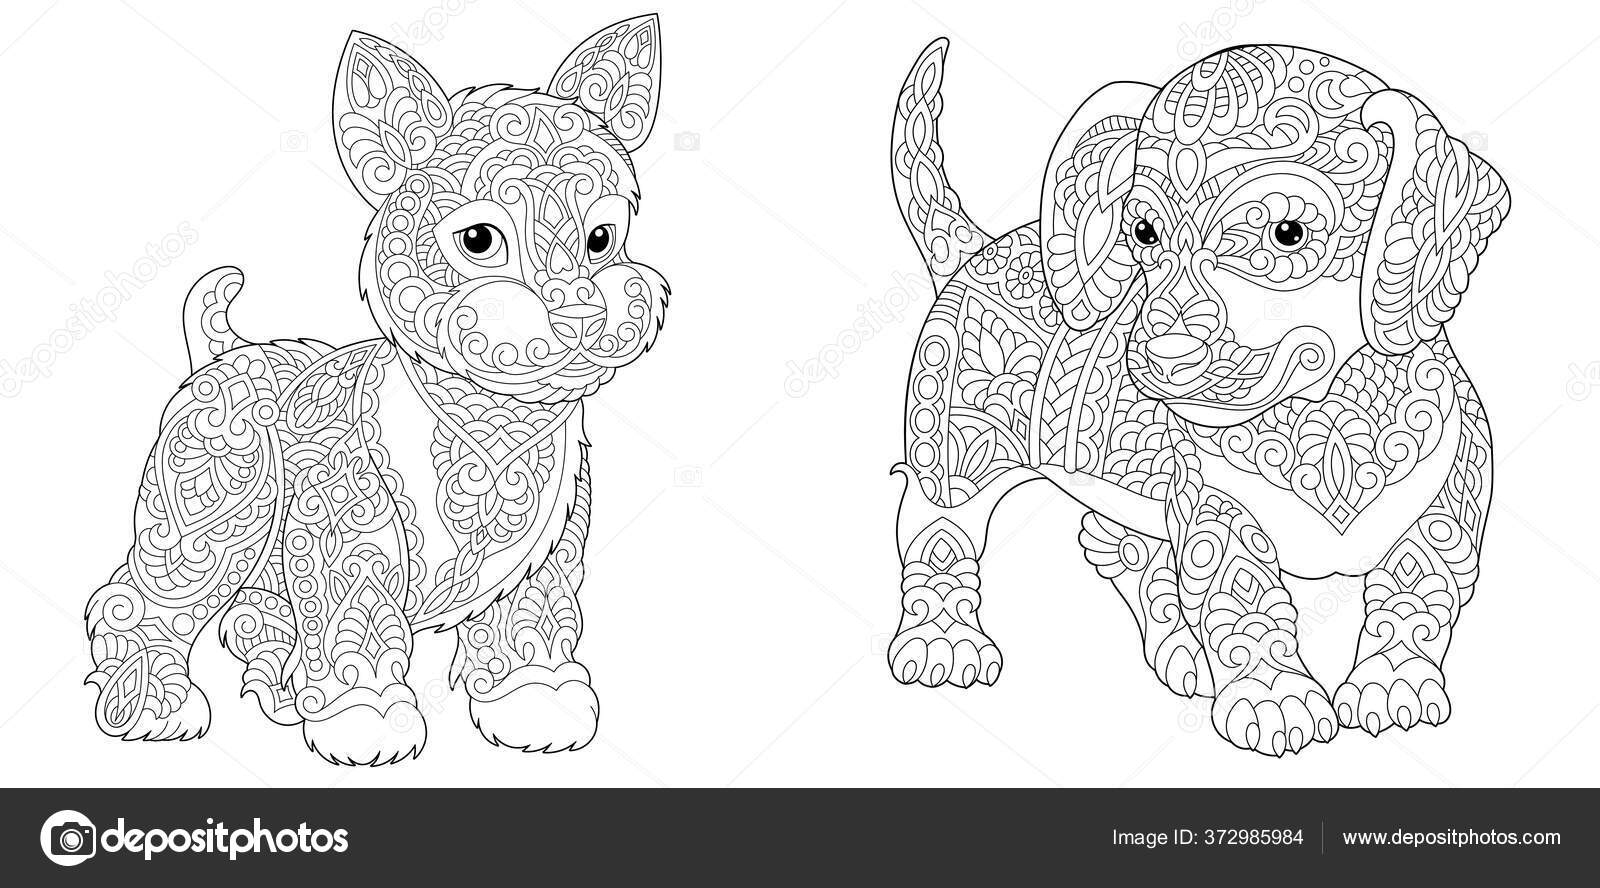 Animal Coloring Pages Cute Yorkshire Terrier Dachshund Line Art ...